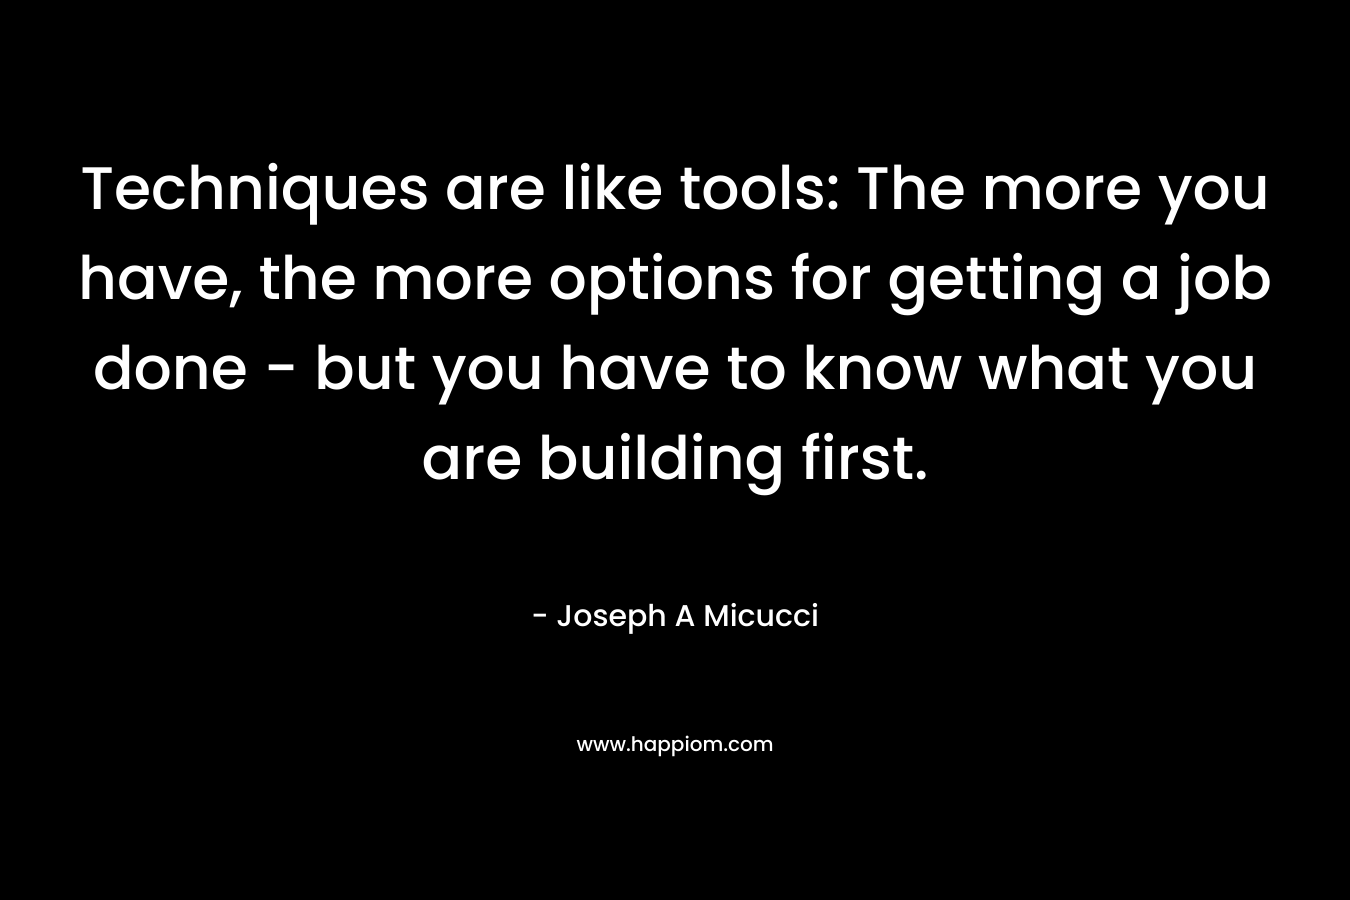 Techniques are like tools: The more you have, the more options for getting a job done – but you have to know what you are building first. – Joseph A Micucci